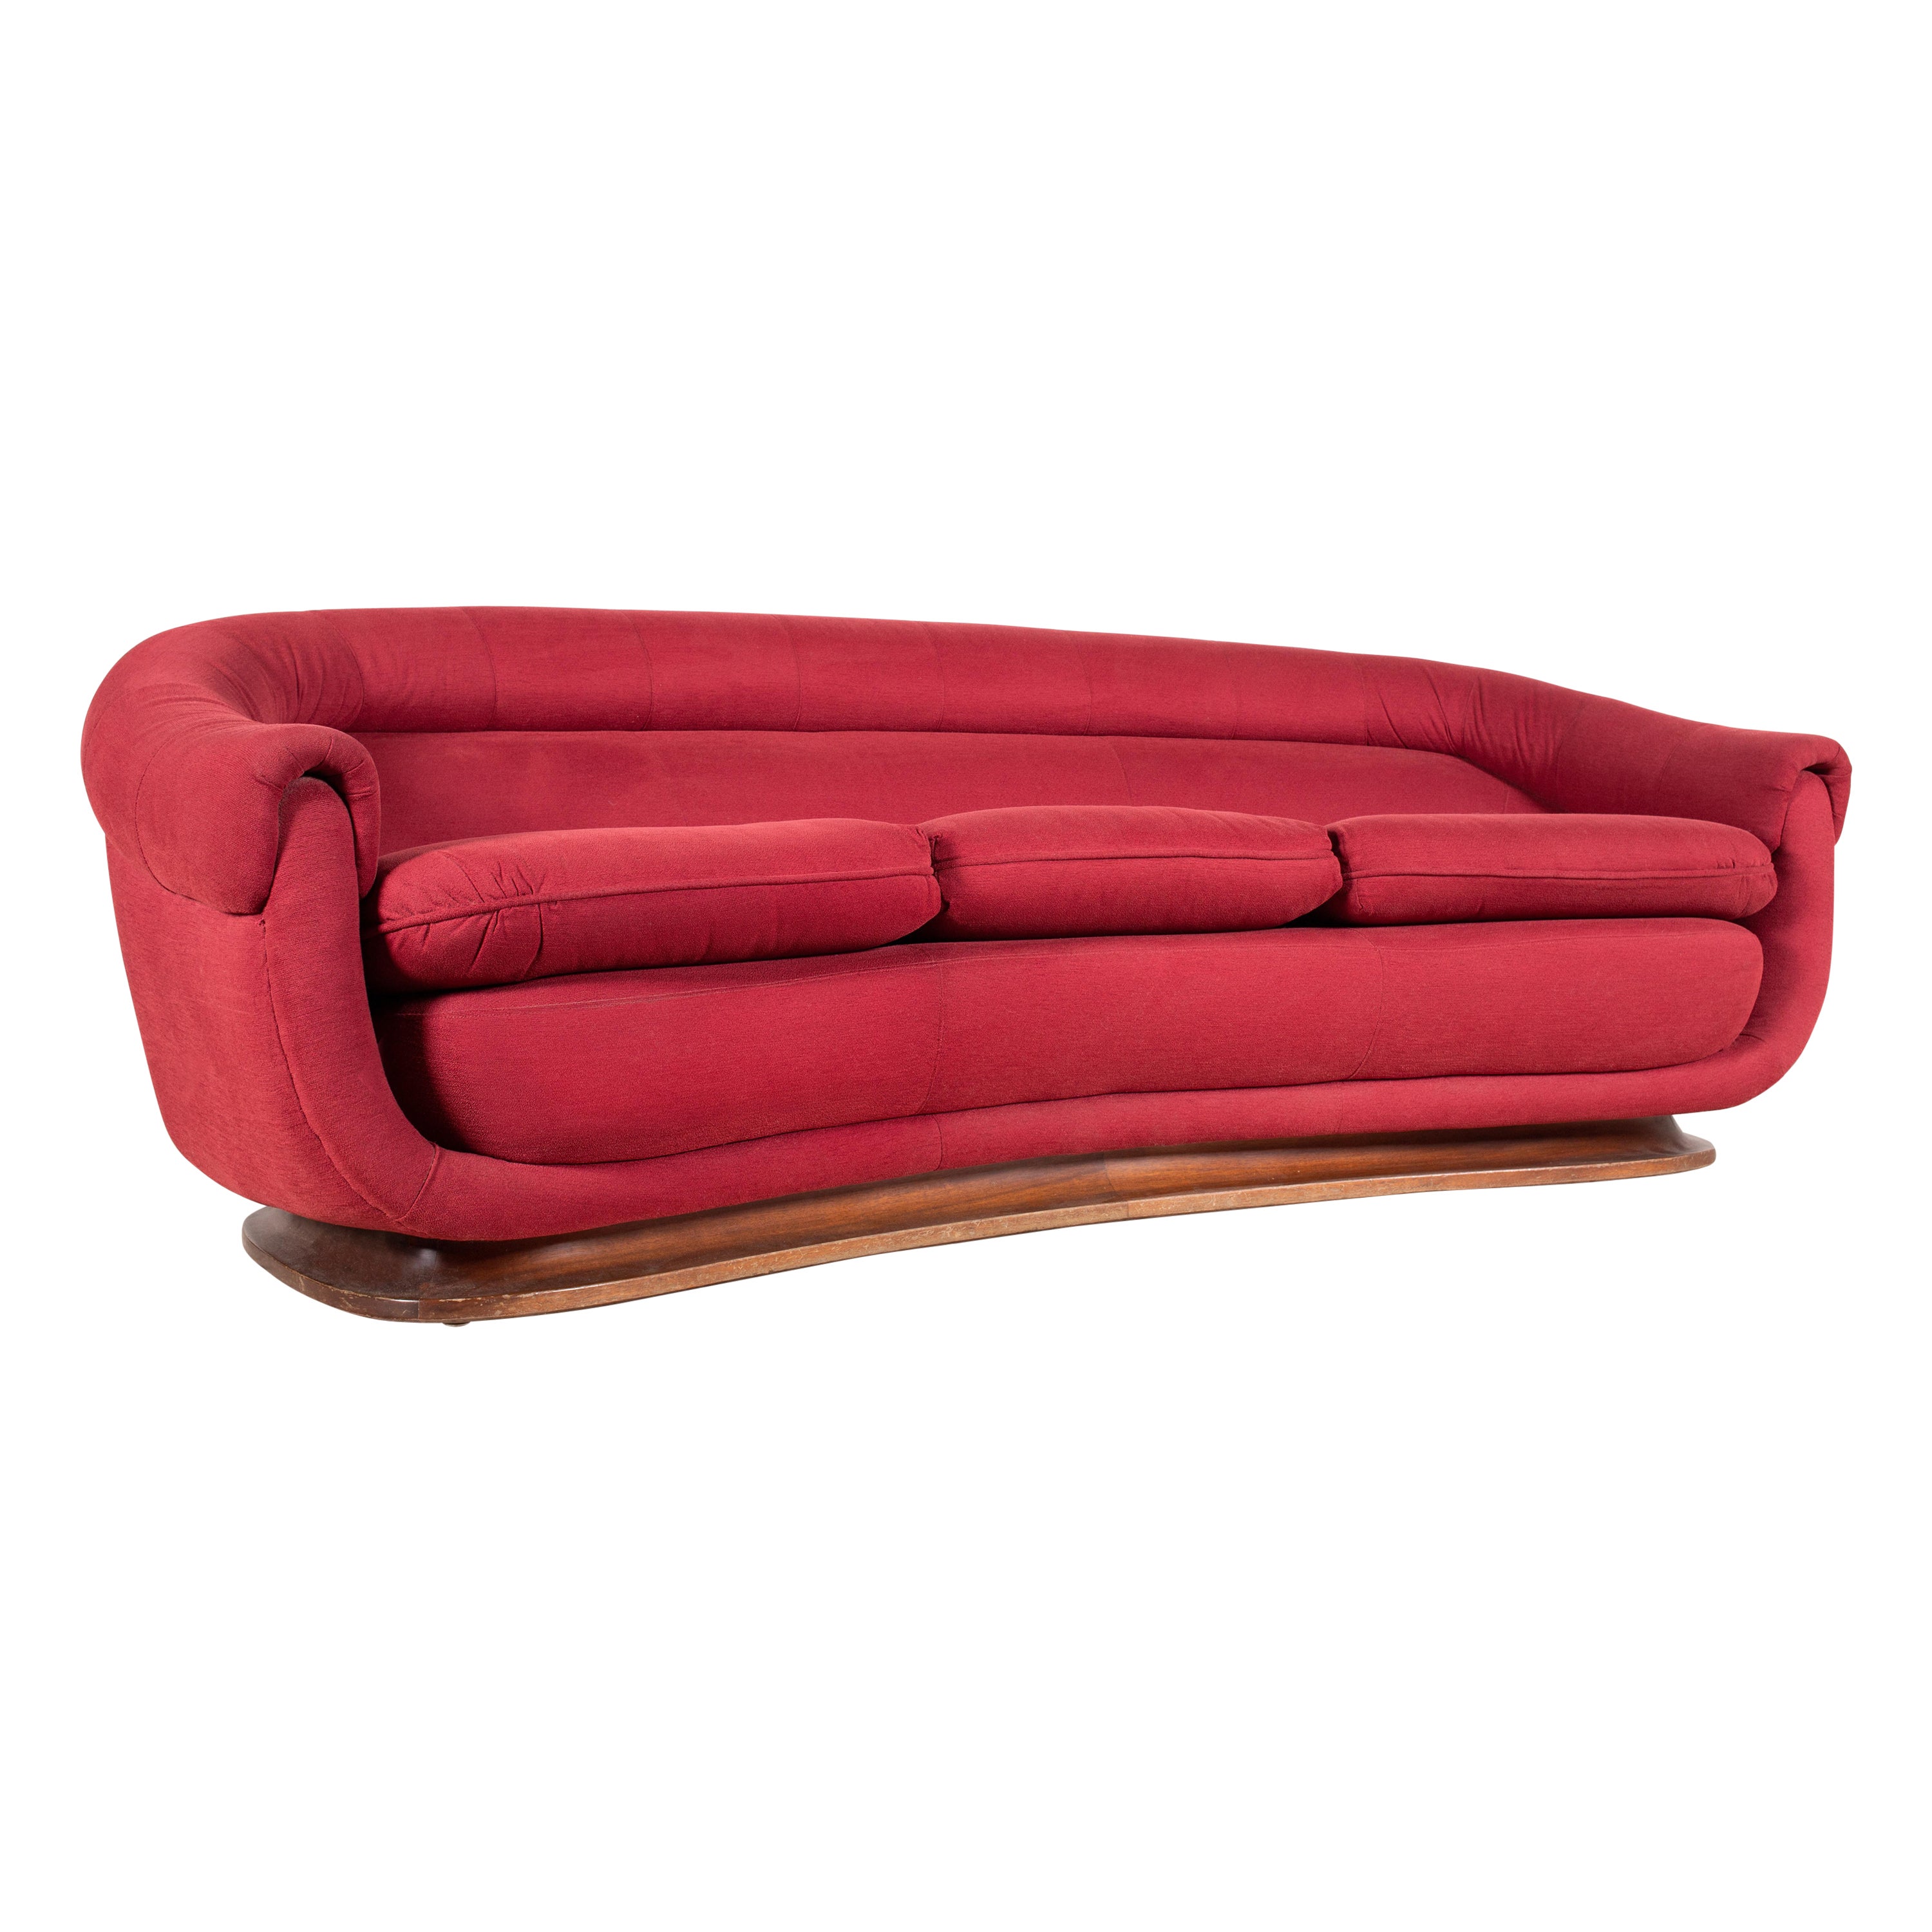 The Moderns Modernity Italian Curved / Crescent 3-Seat Sofa in Red Fabric & Walnut des années 1950